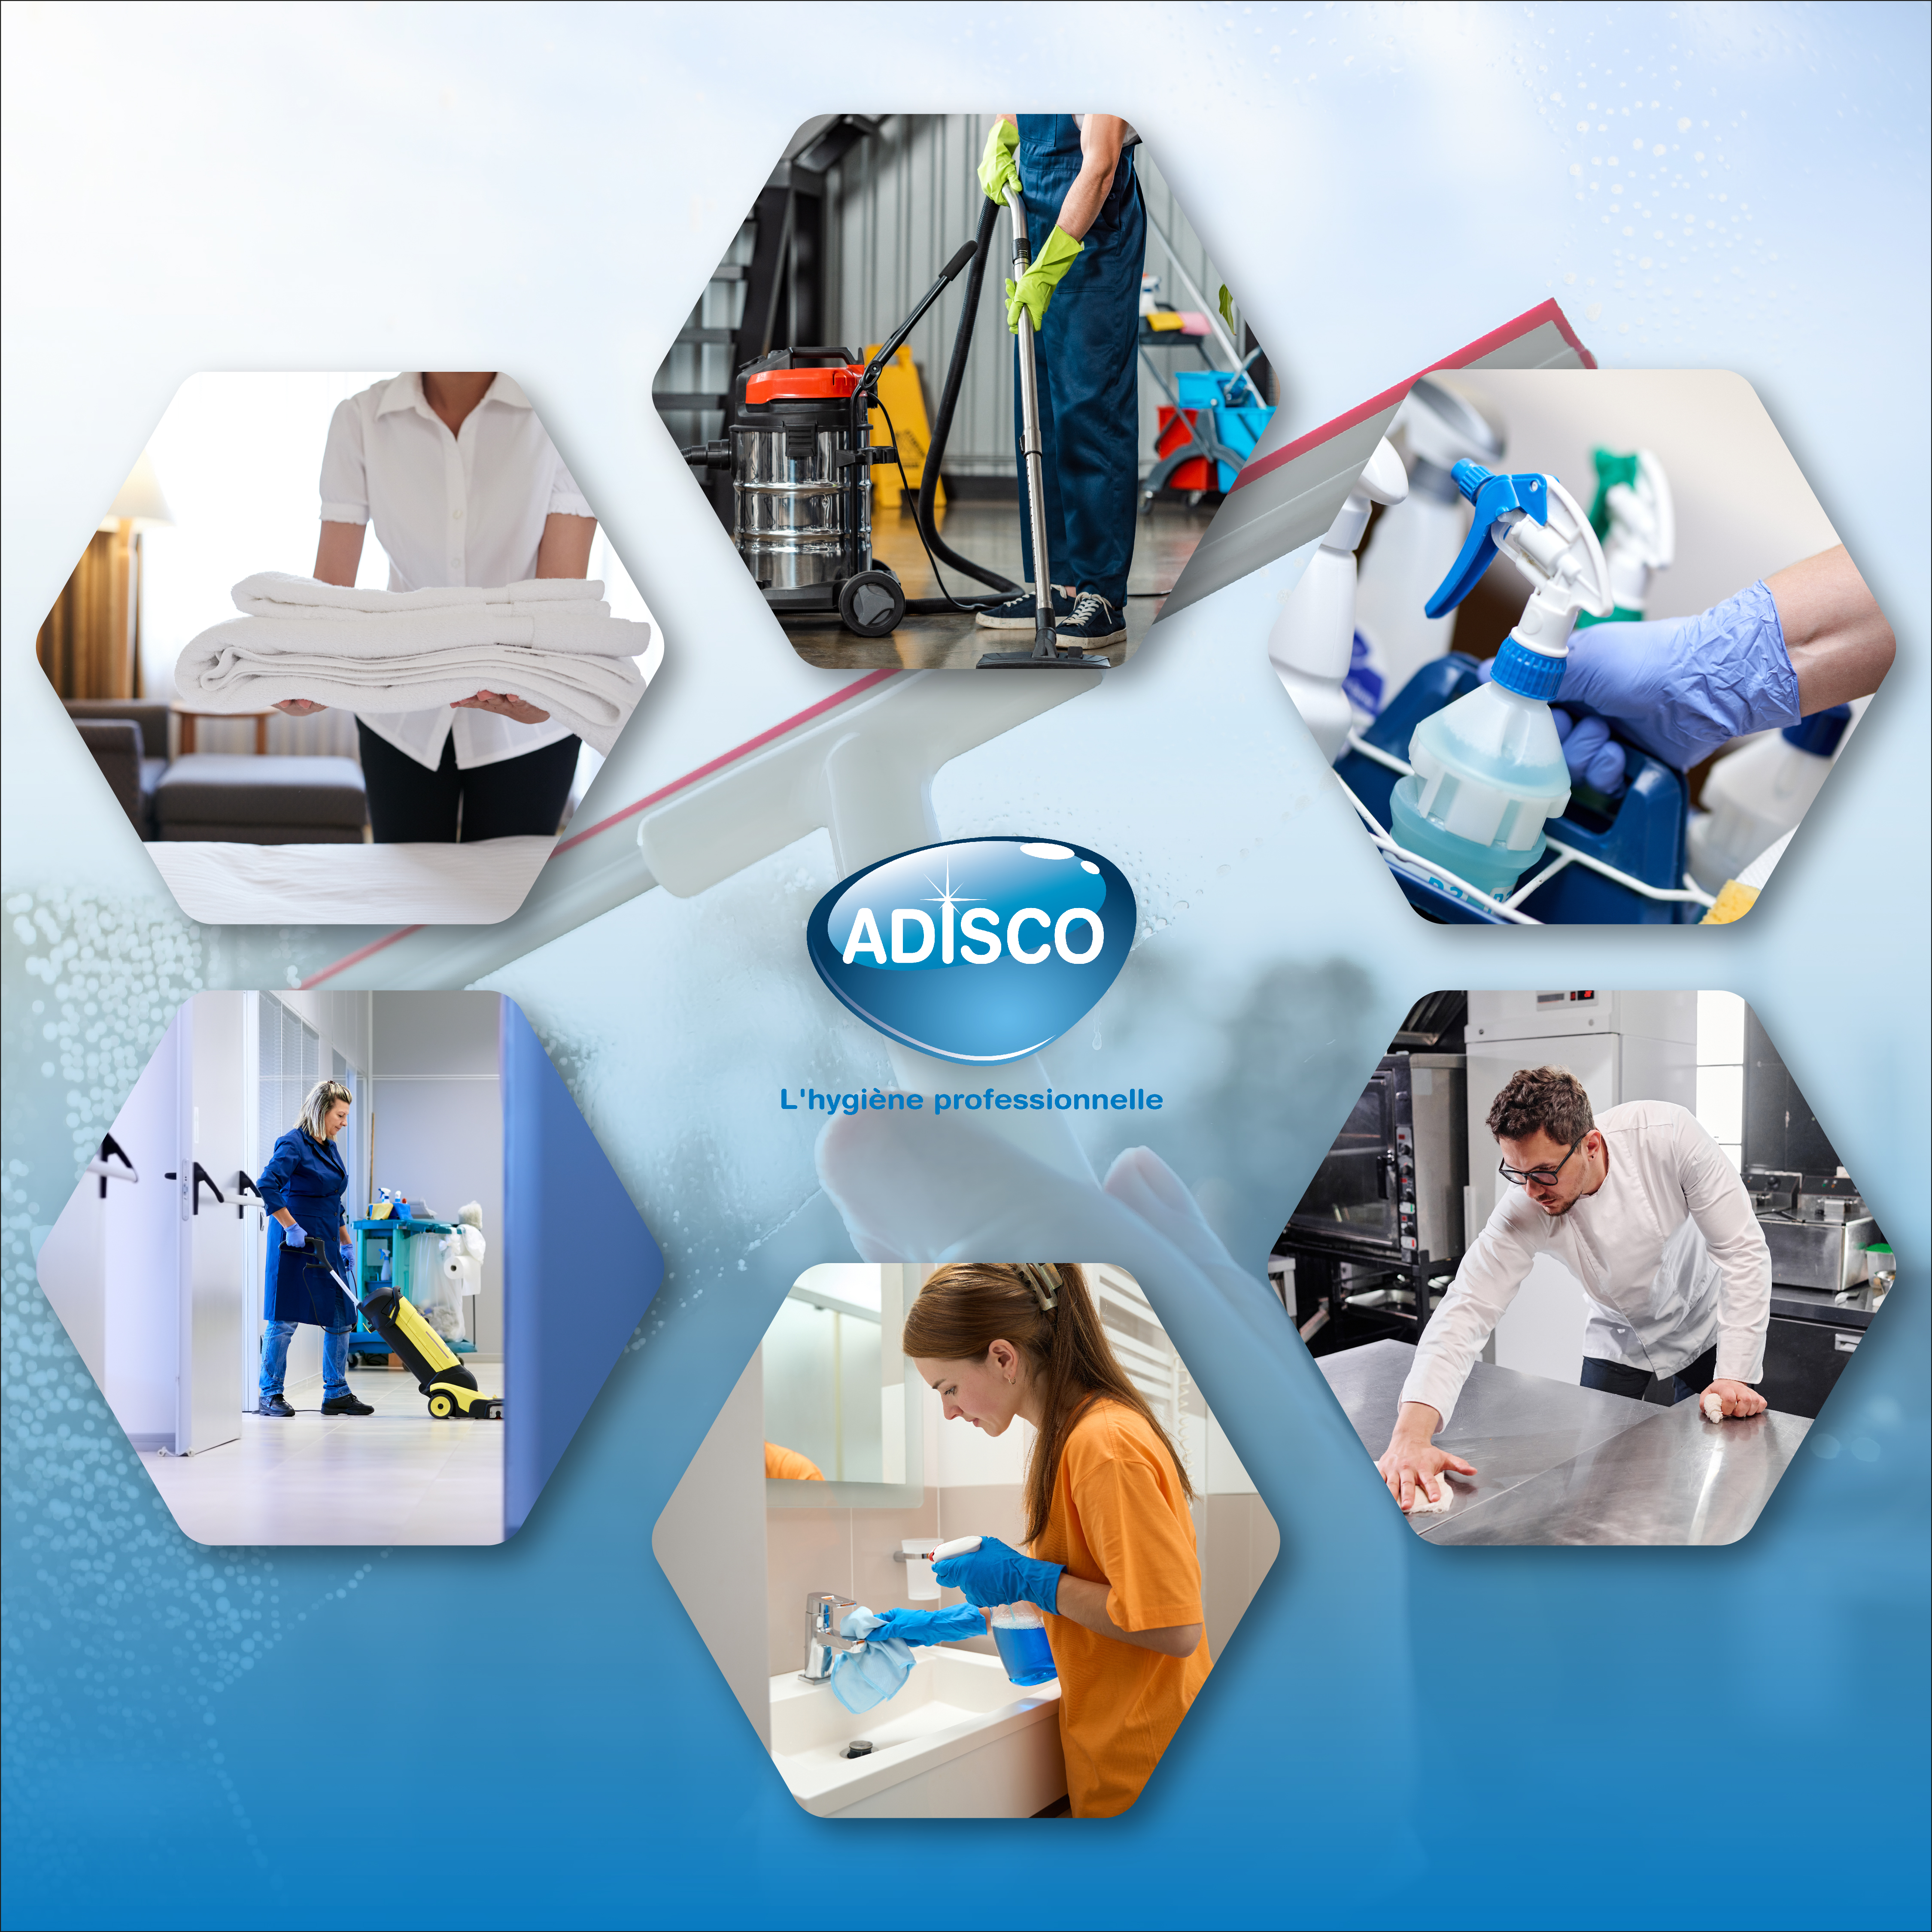 The Importance of Cleanliness in All Professional Fields: A Valentine's Day Celebration with ADISCO ðŸ§¹ðŸŒŸ